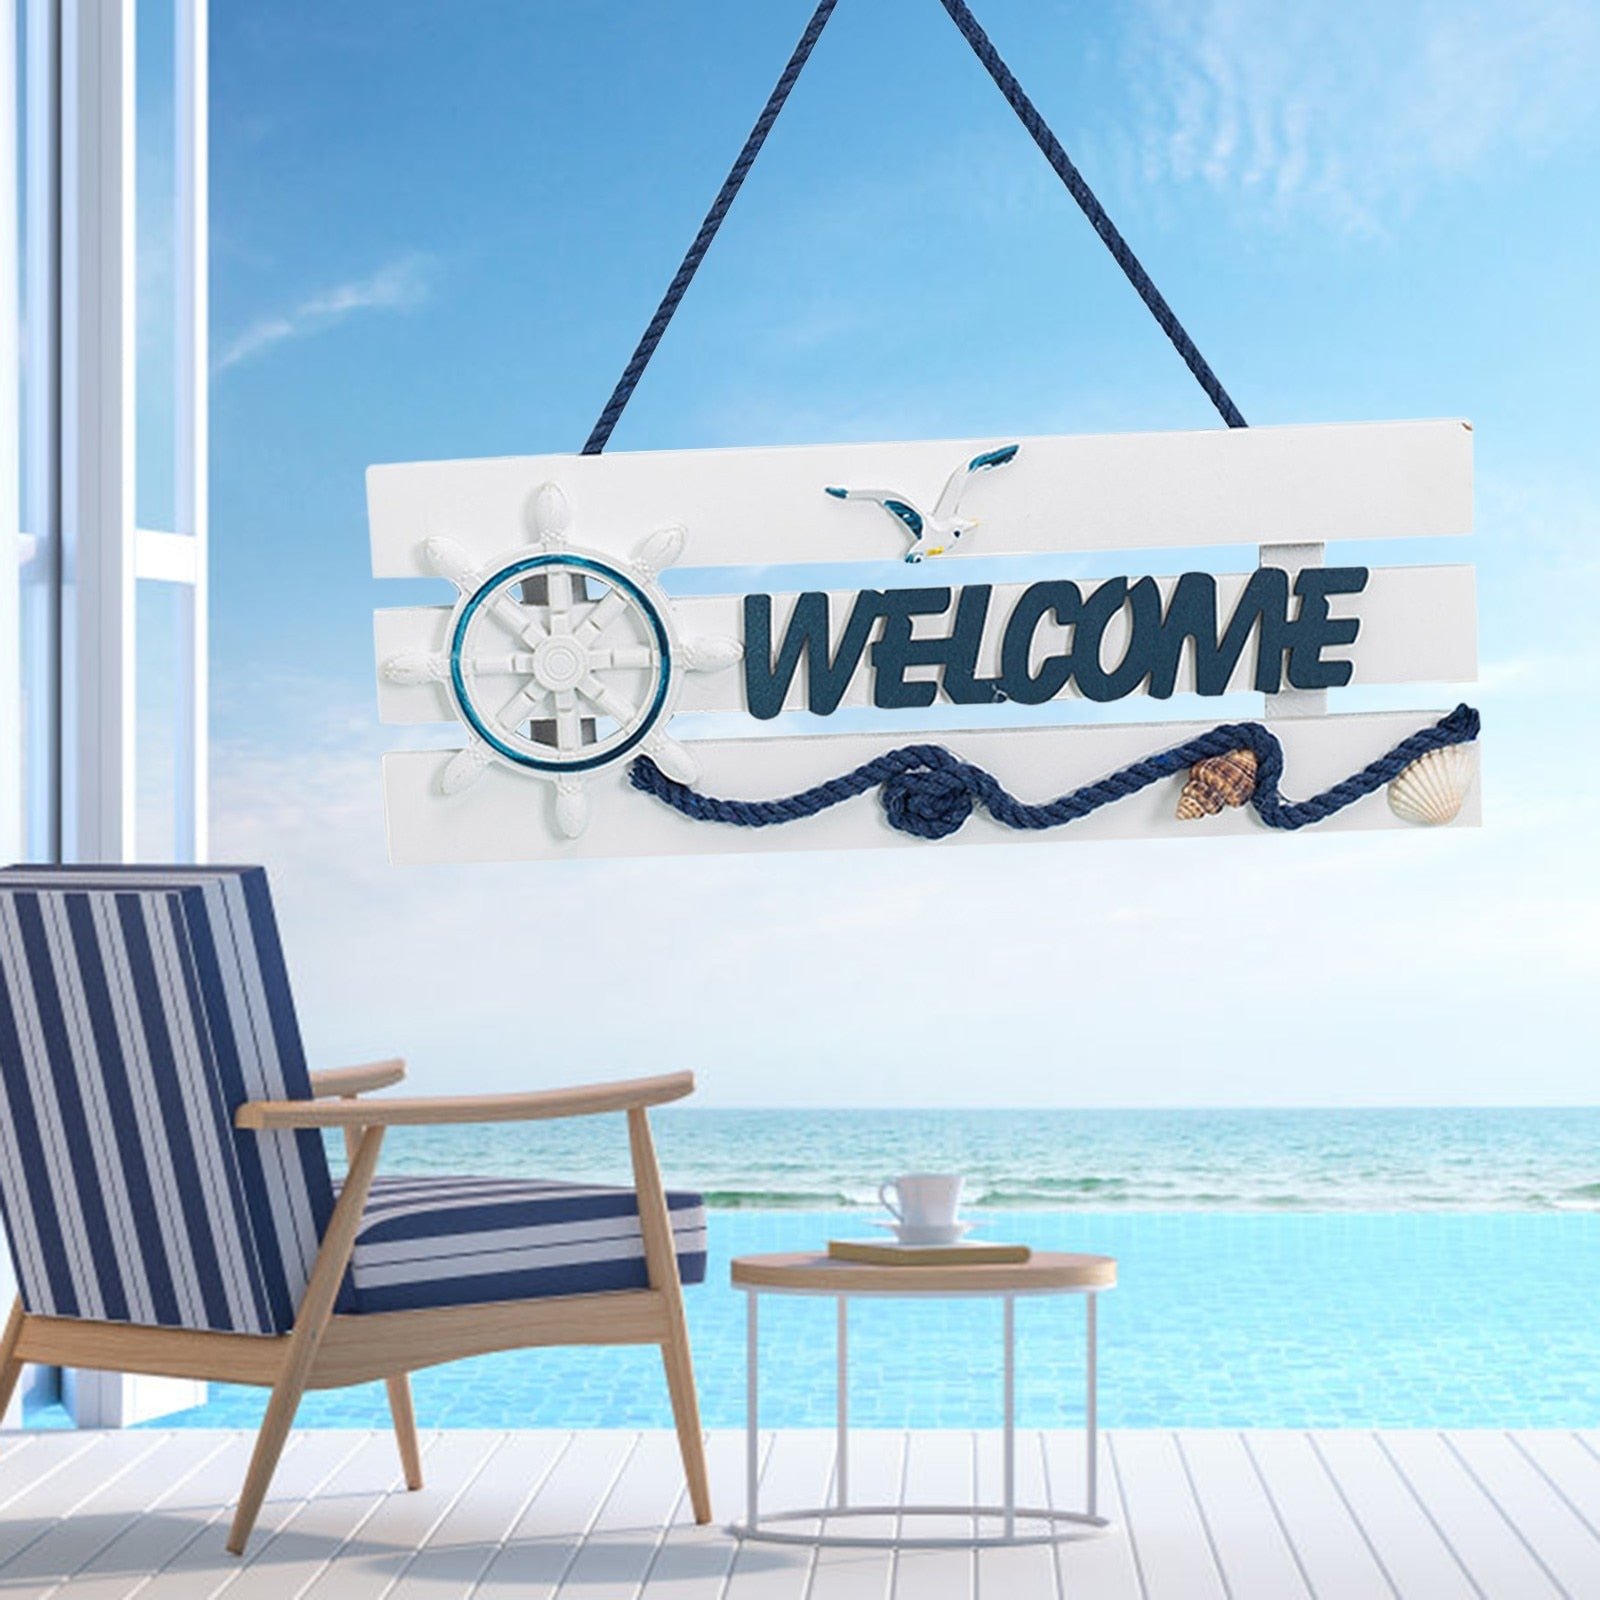 2021 Welcome Hanging Board Wooden Wall Nautical Rural Decorative Beach Style Helmsman Sea Anchor Seaside Home Door Ornaments